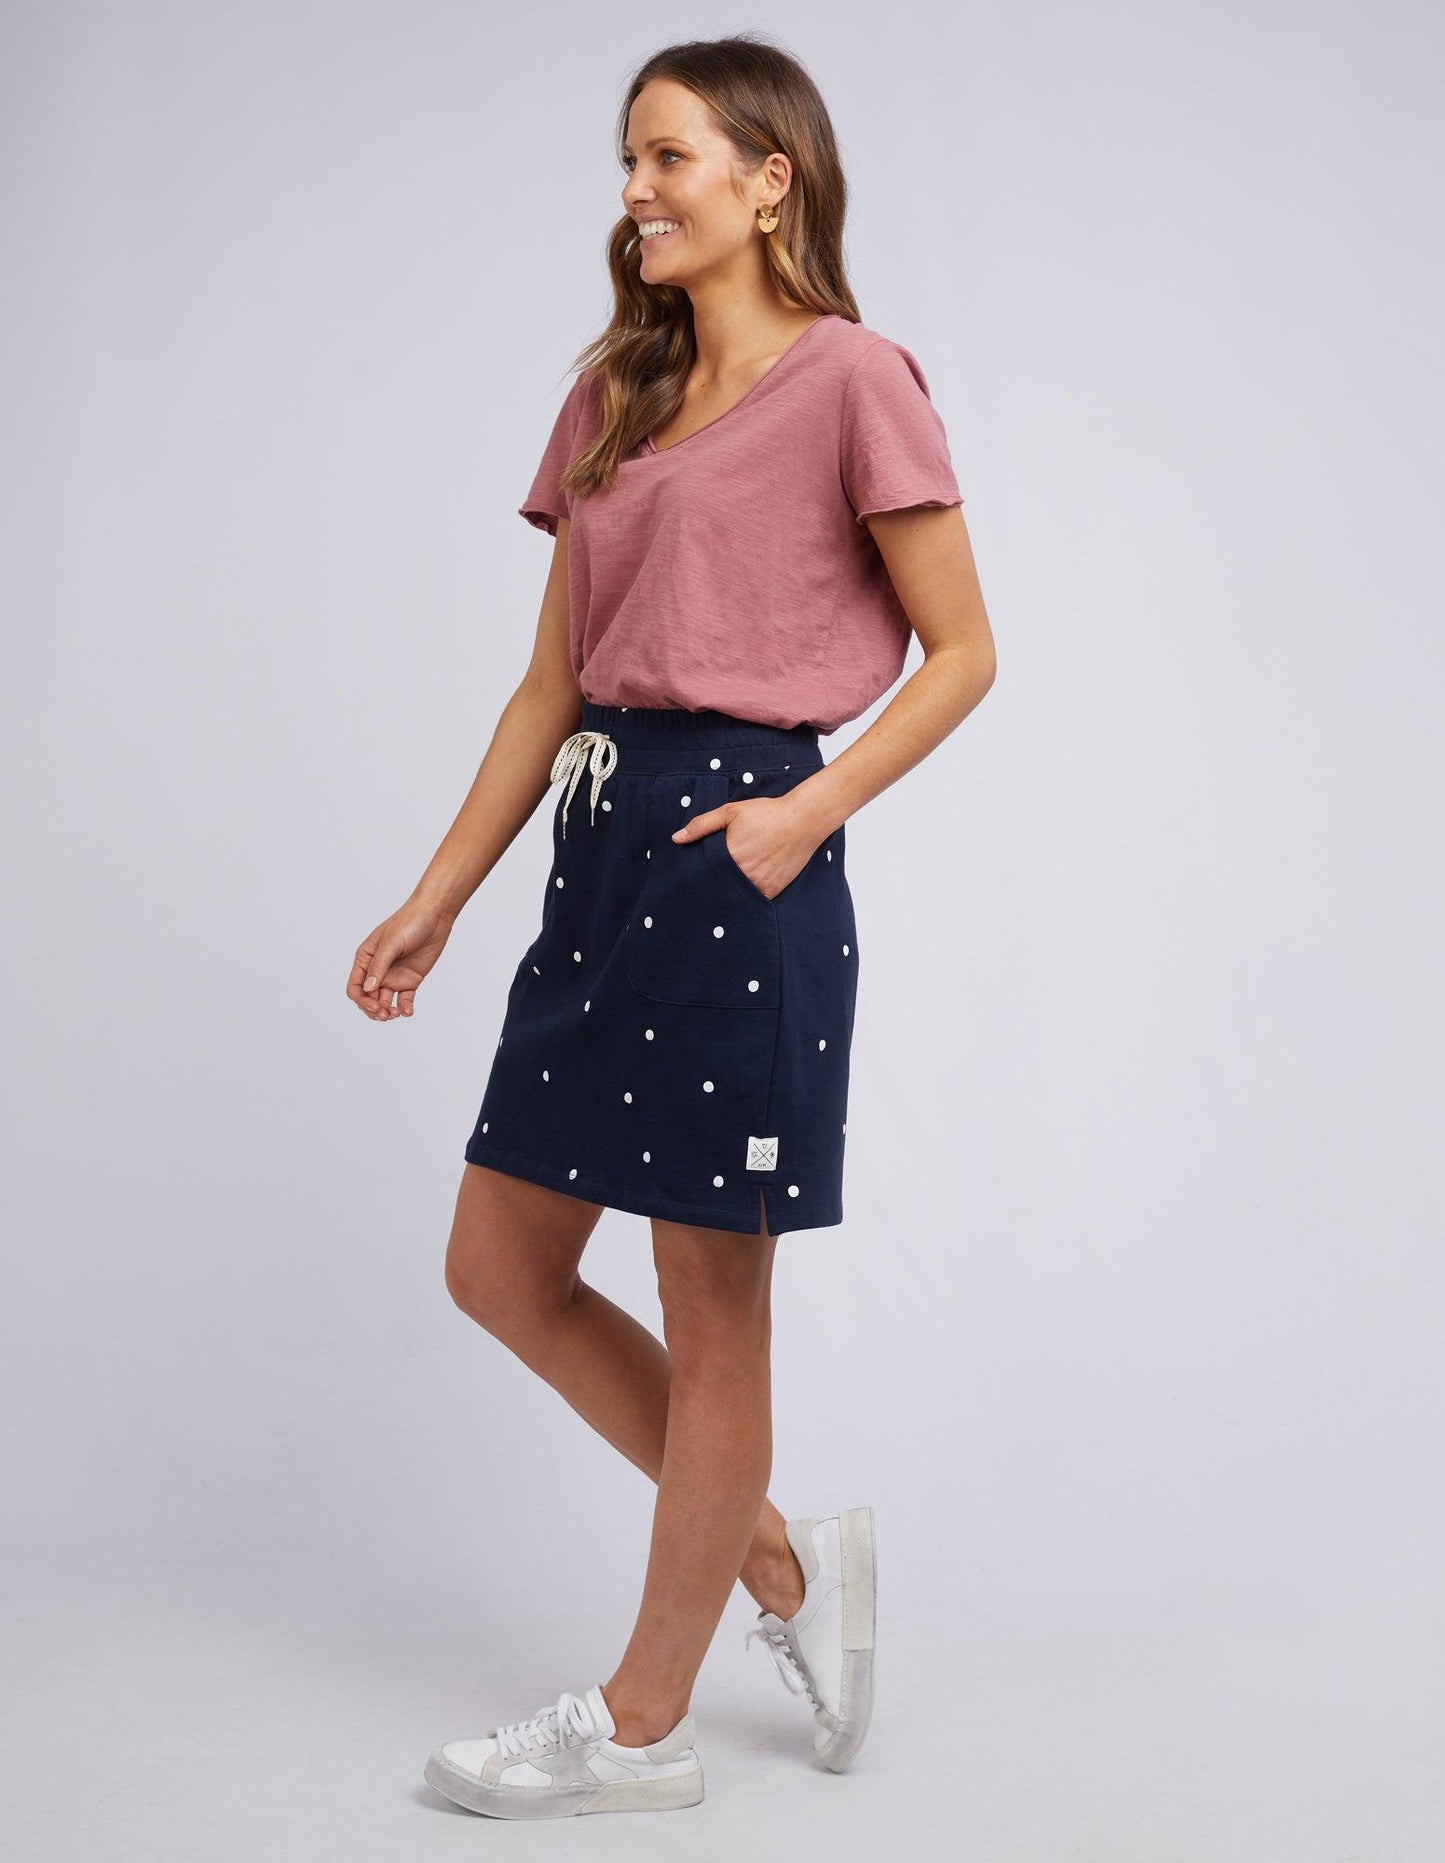 Cassie Skirt Spot - Navy With White Spot - Elm Lifestyle - FUDGE Gifts Home Lifestyle